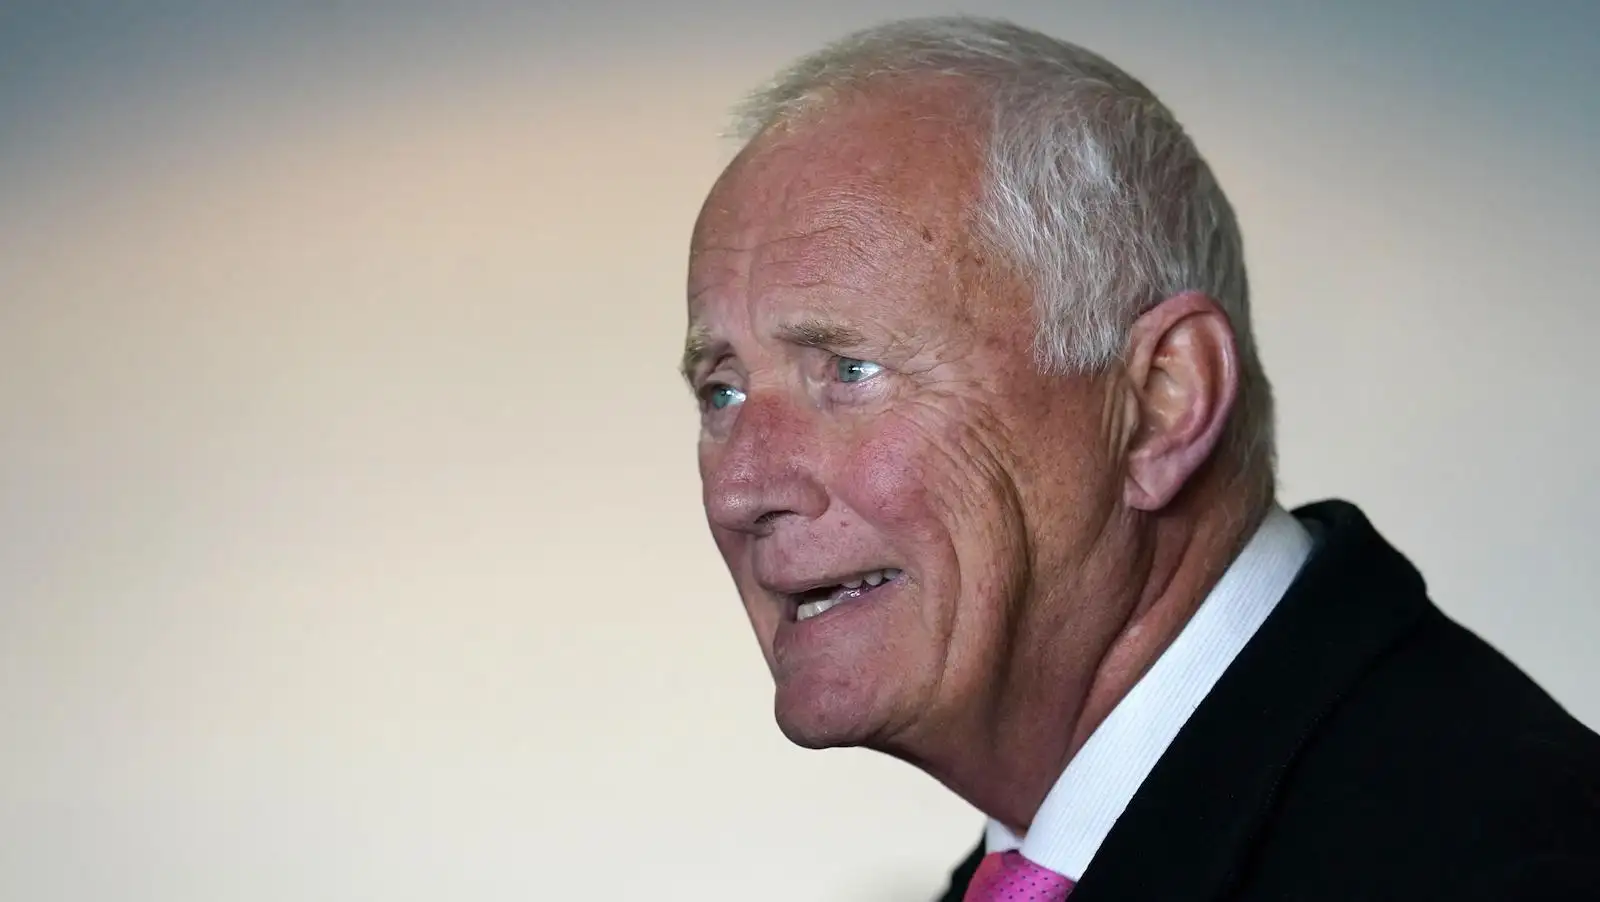 Barry Hearn hails ‘breakthrough moment’ for rugby league as celebrities endorse Las Vegas trip